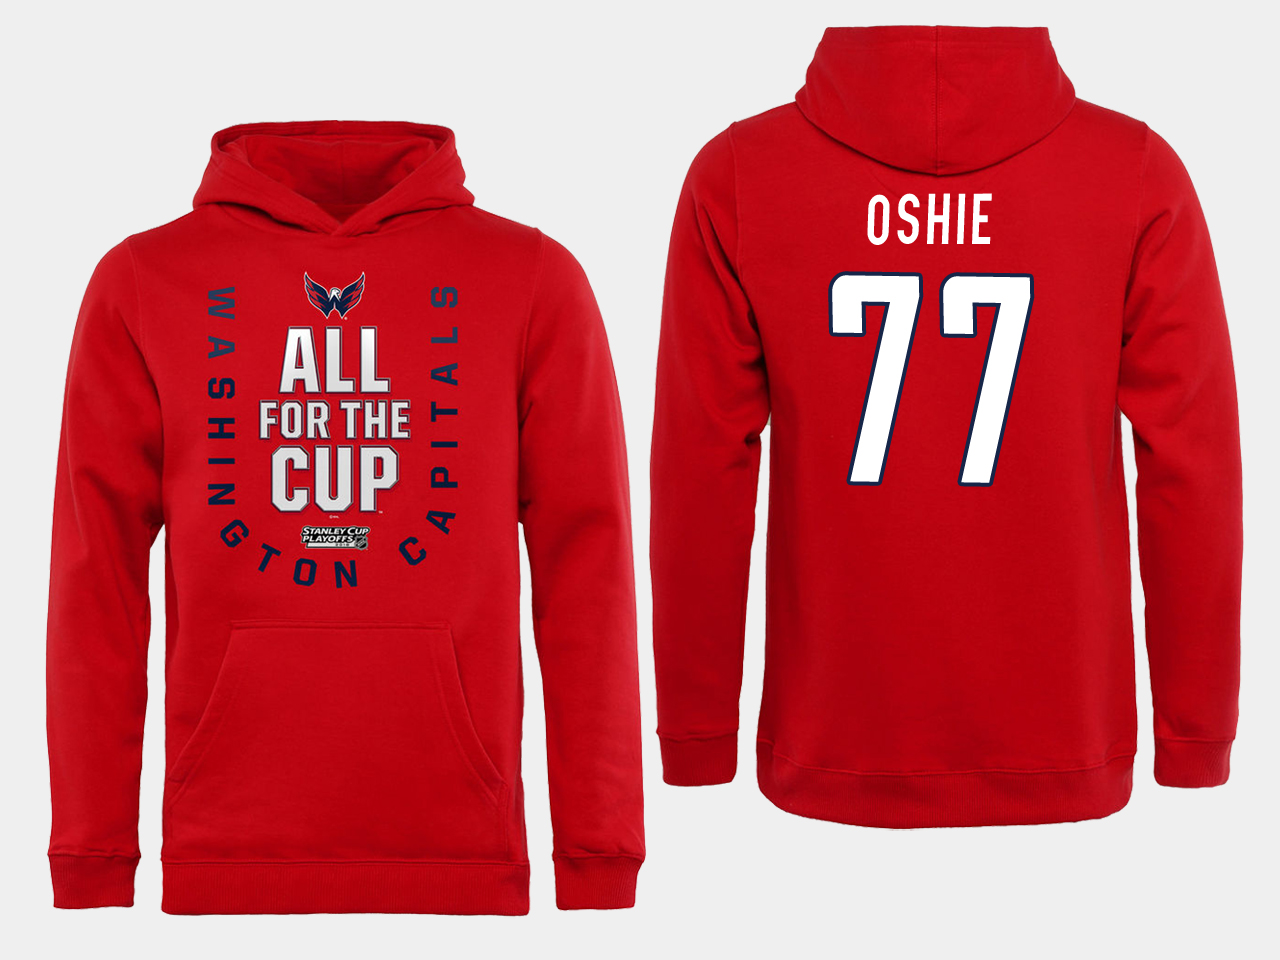 Men NHL Washington Capitals #77 Oshie Red All for the Cup Hoodie->washington capitals->NHL Jersey